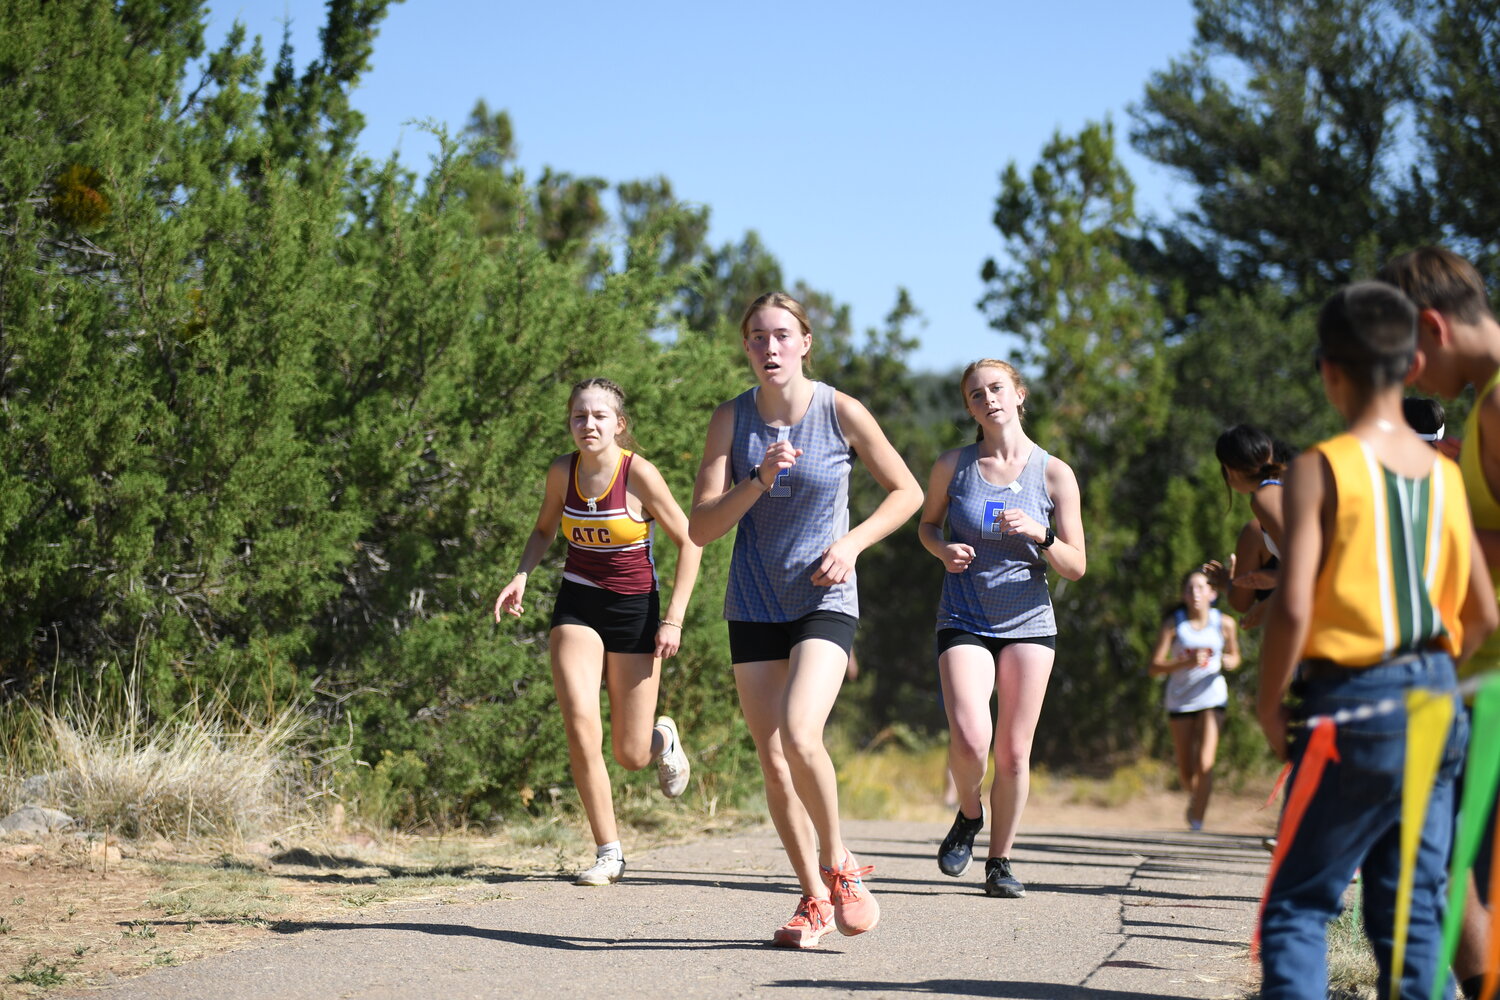 East Mountain's Ruth Trullinger, center, pulls ahead of teammate Verity Gray, right, and a runner from ATC-Santa Fe in the varsity girls race at last week's Nick Martin Memorial Invite.